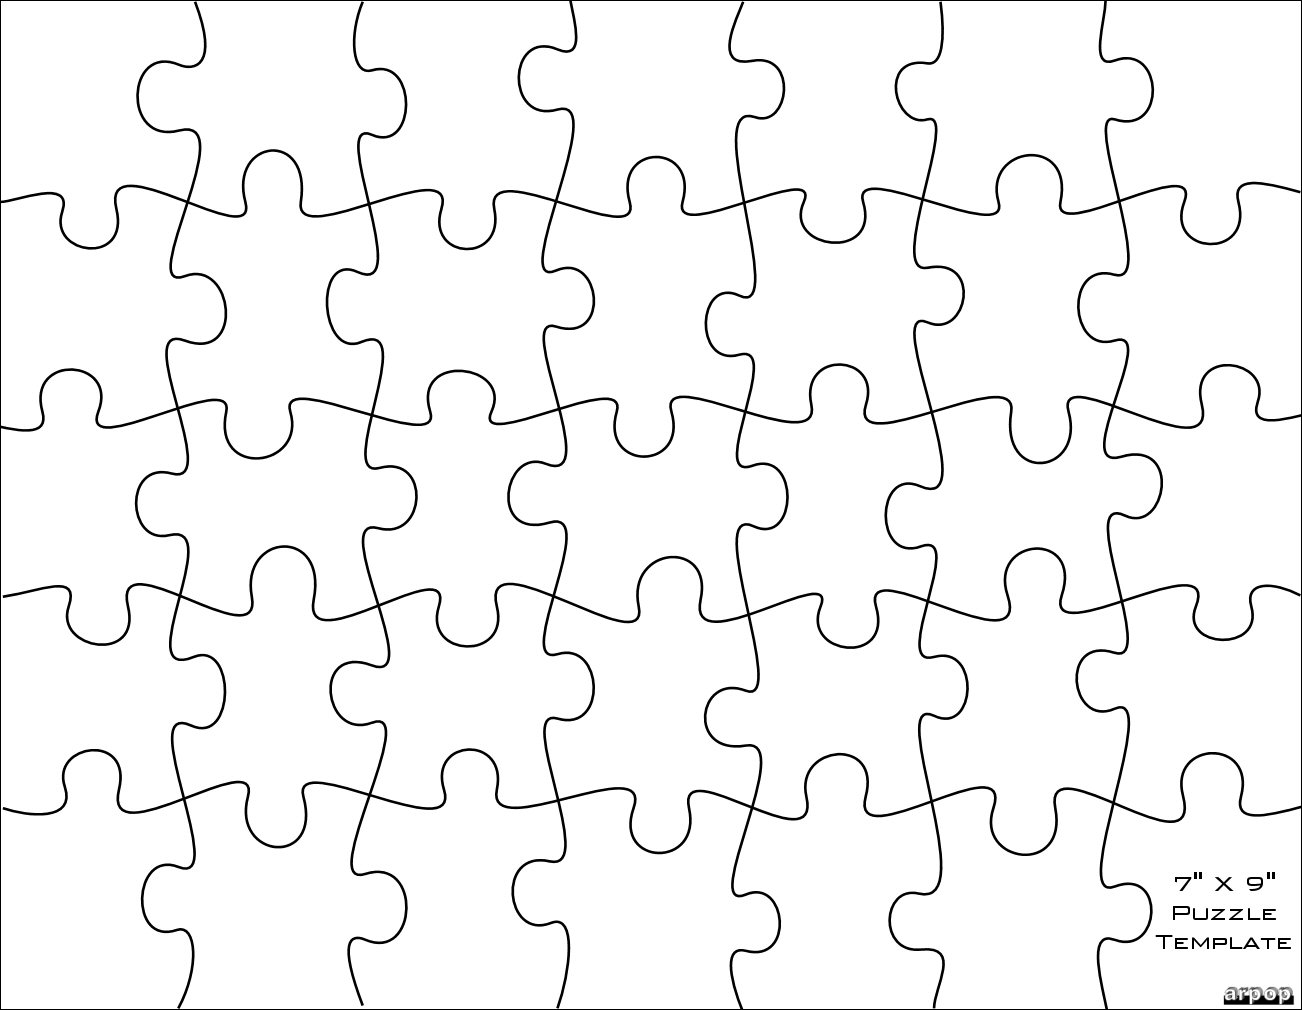 Free Puzzle Template, Download Free Puzzle Template png images Throughout Jigsaw Puzzle Template For Word